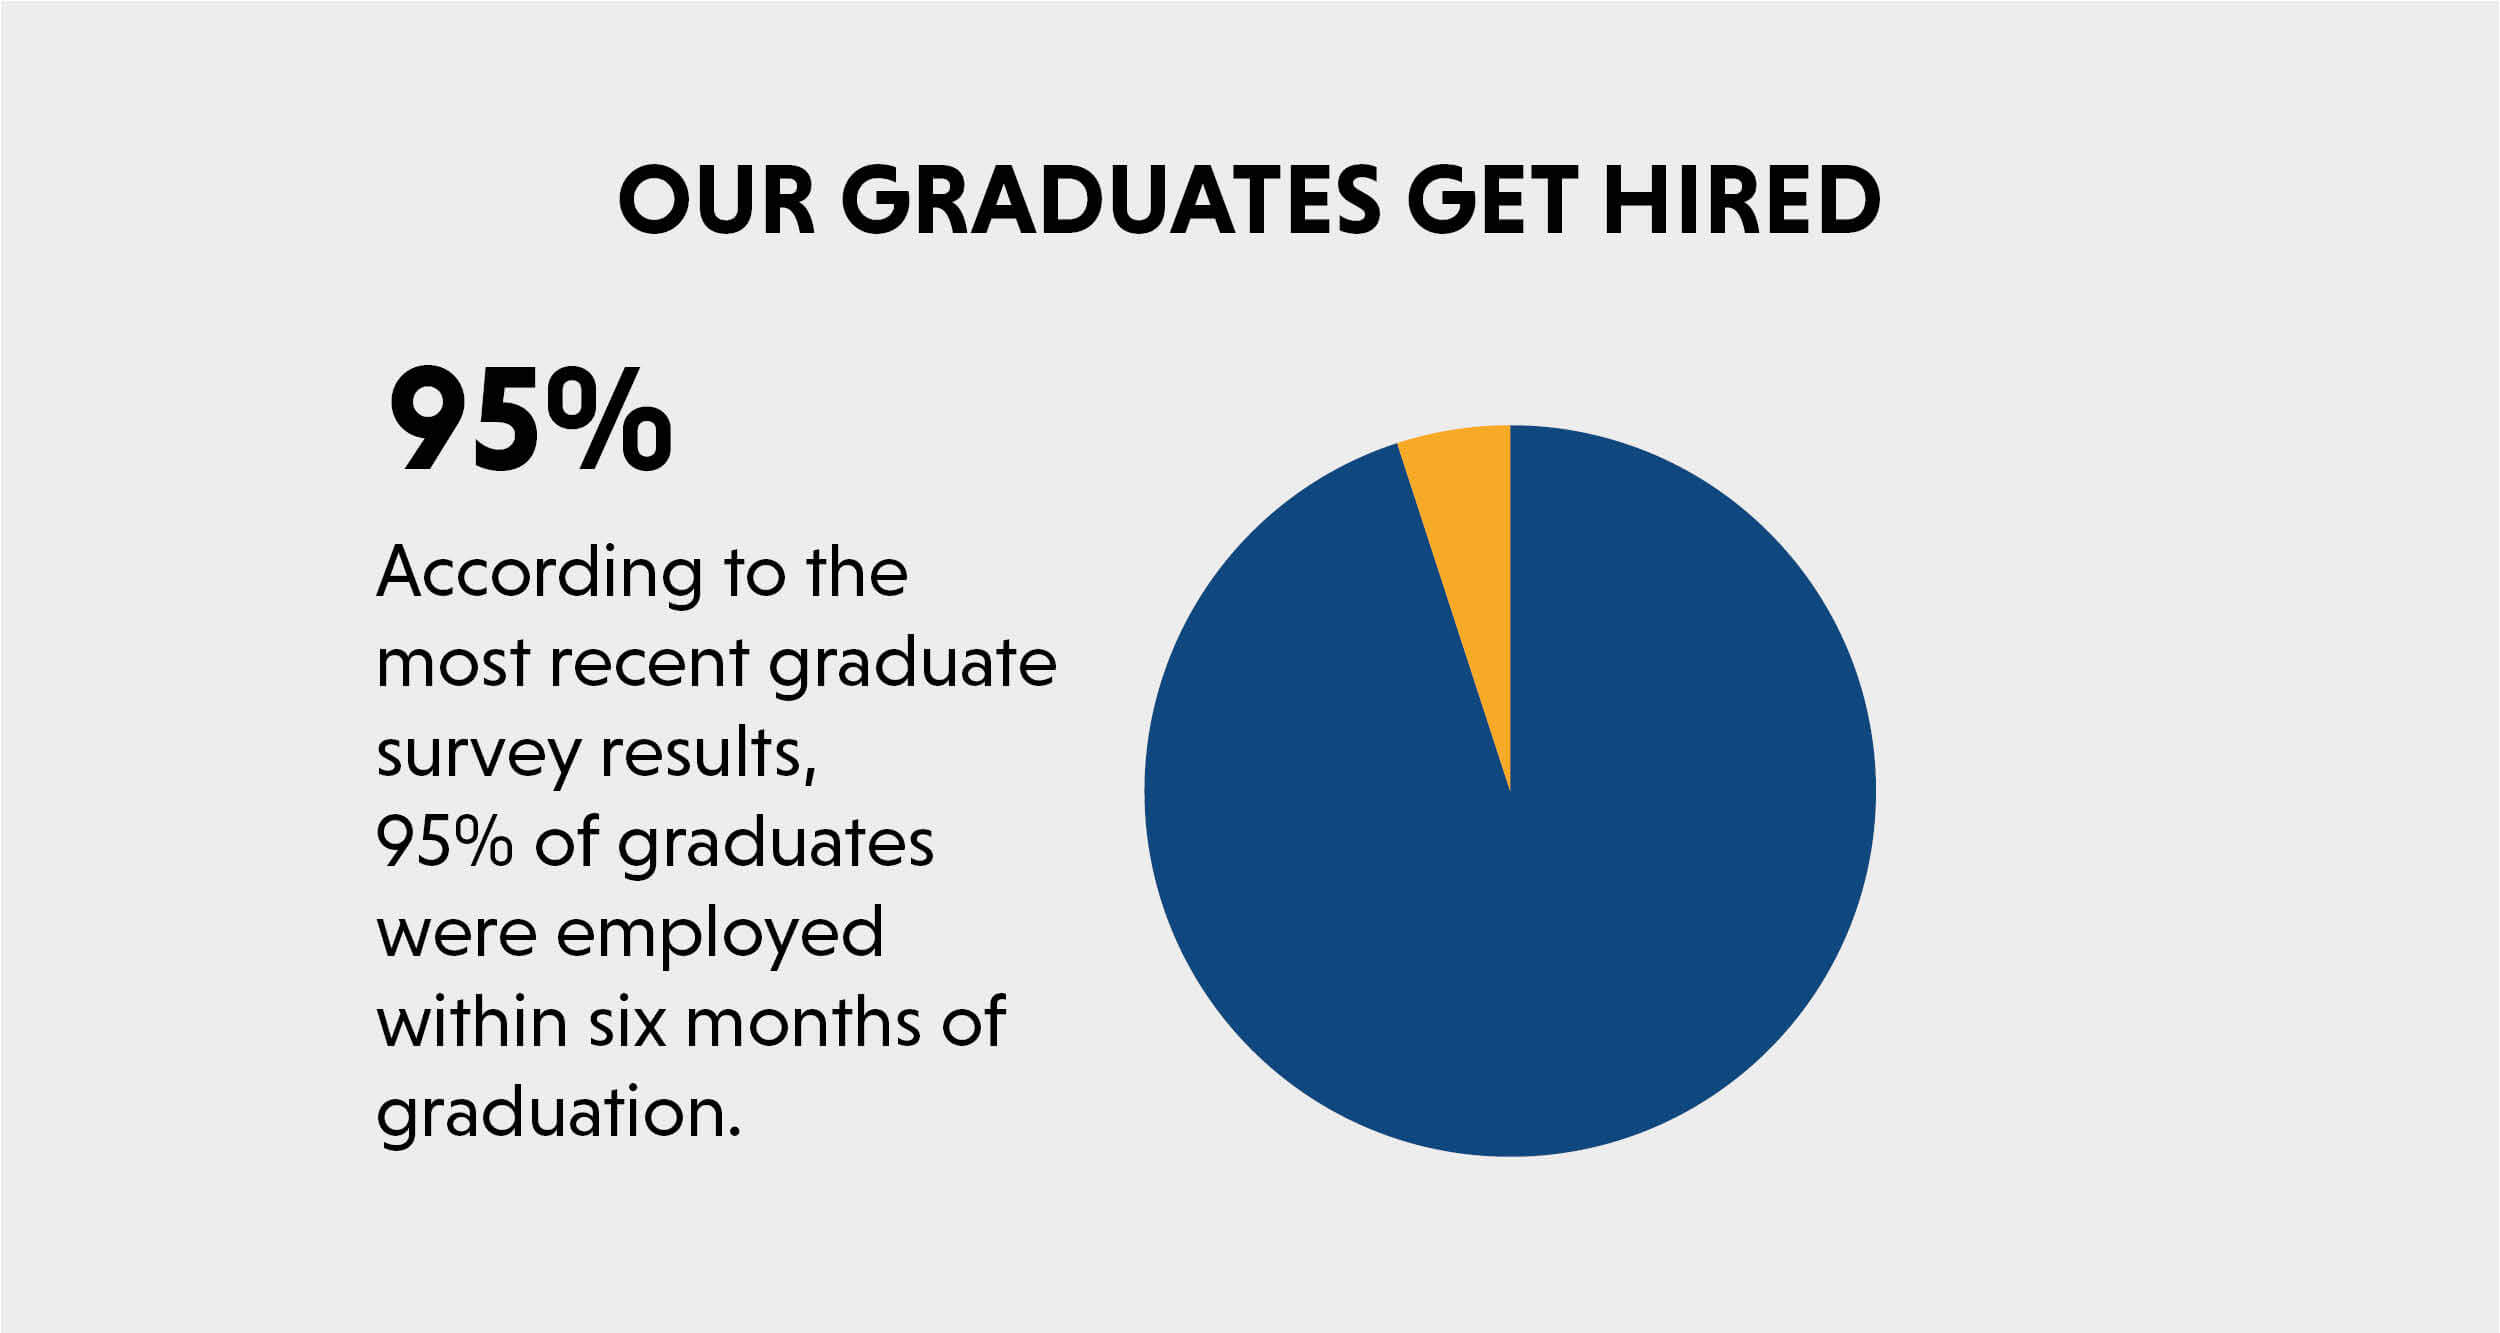 A pie chart showing that 95% of the College's graduates were employed within six months of graduating